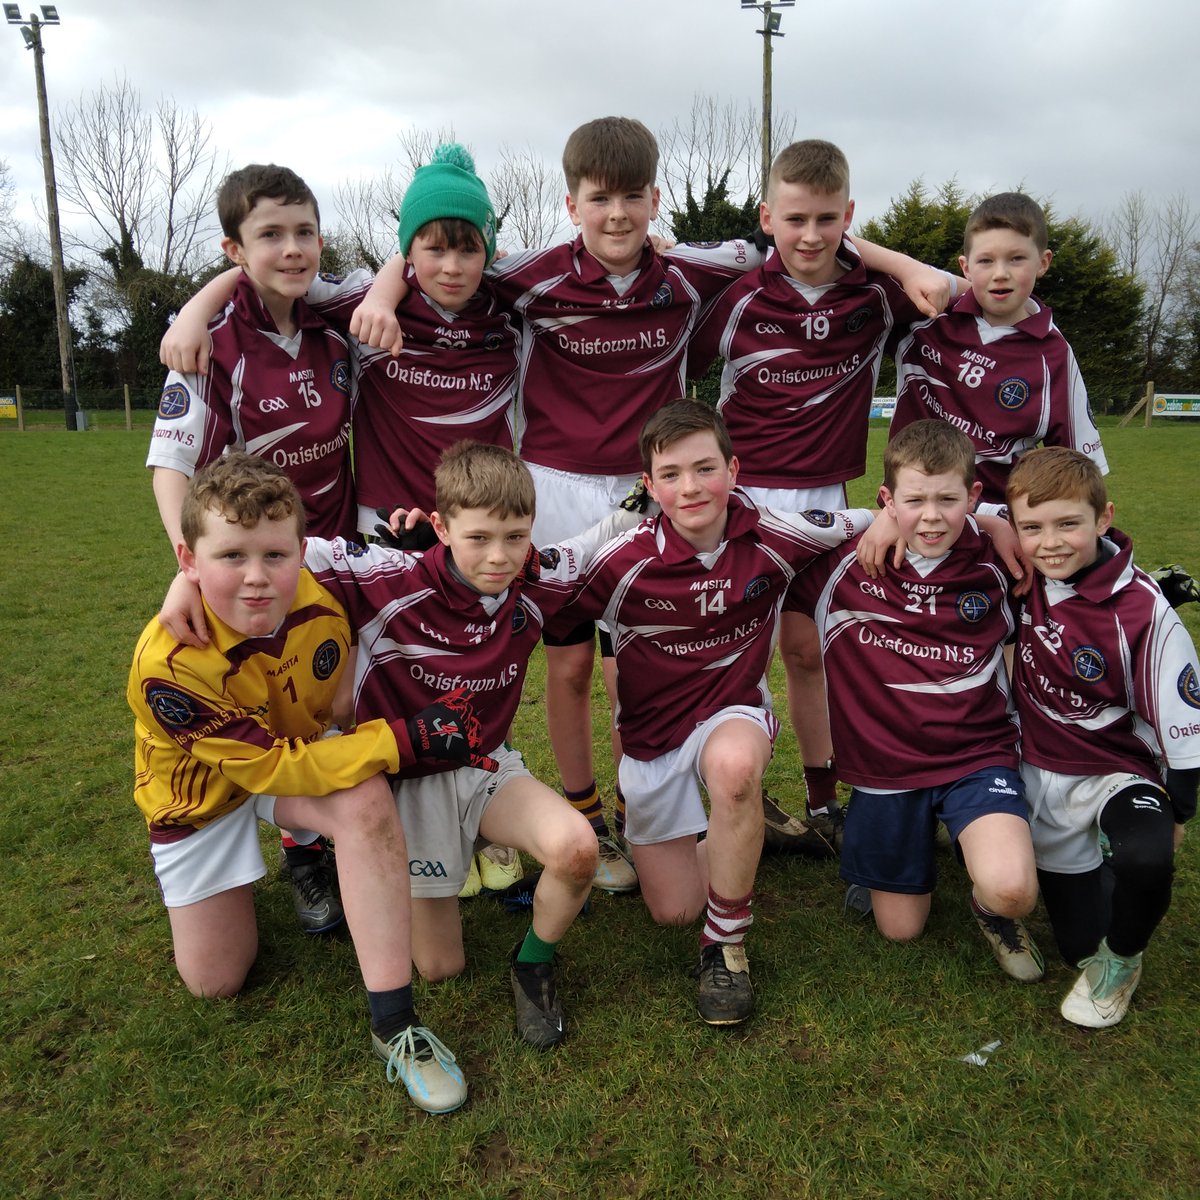 Well done to the boys mini sevens team who finished second in a strong group in Kilmainham yesterday. Congratulations to St.Colmcilles SNS who progress to the next round.